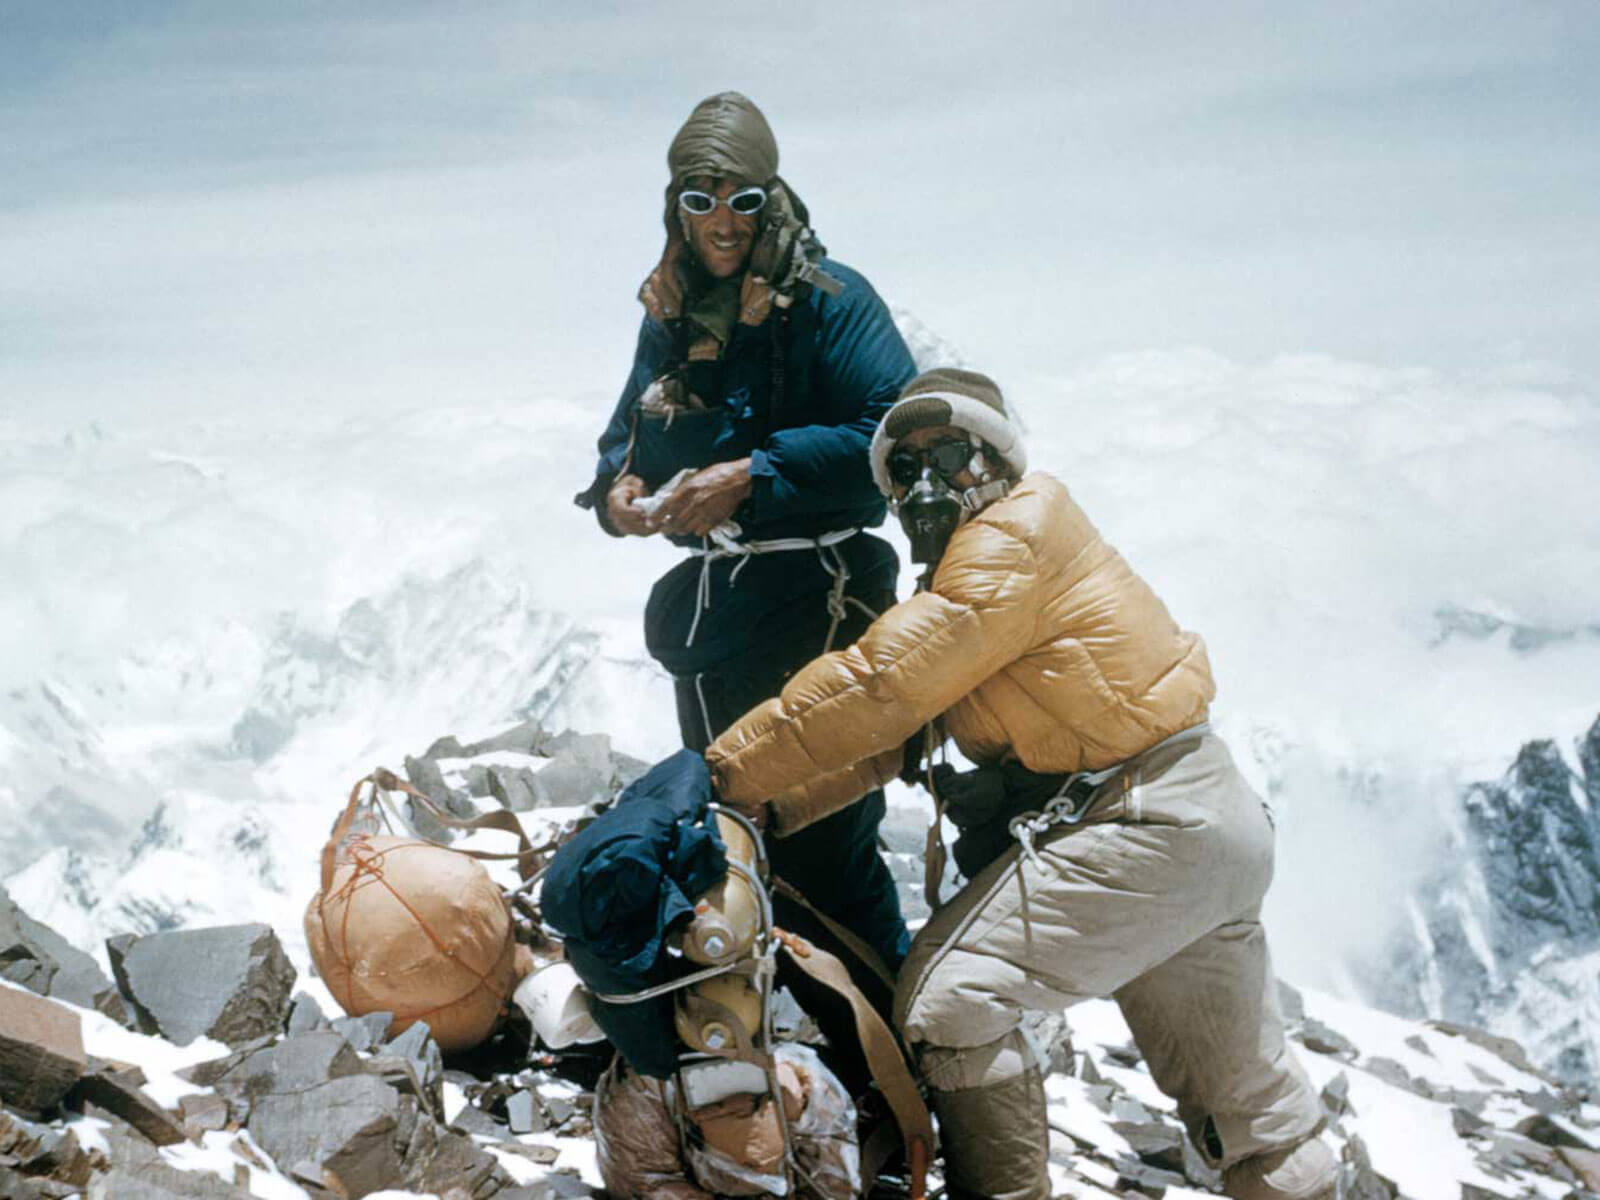 Who was the first to reach the summit of Mount Everest?